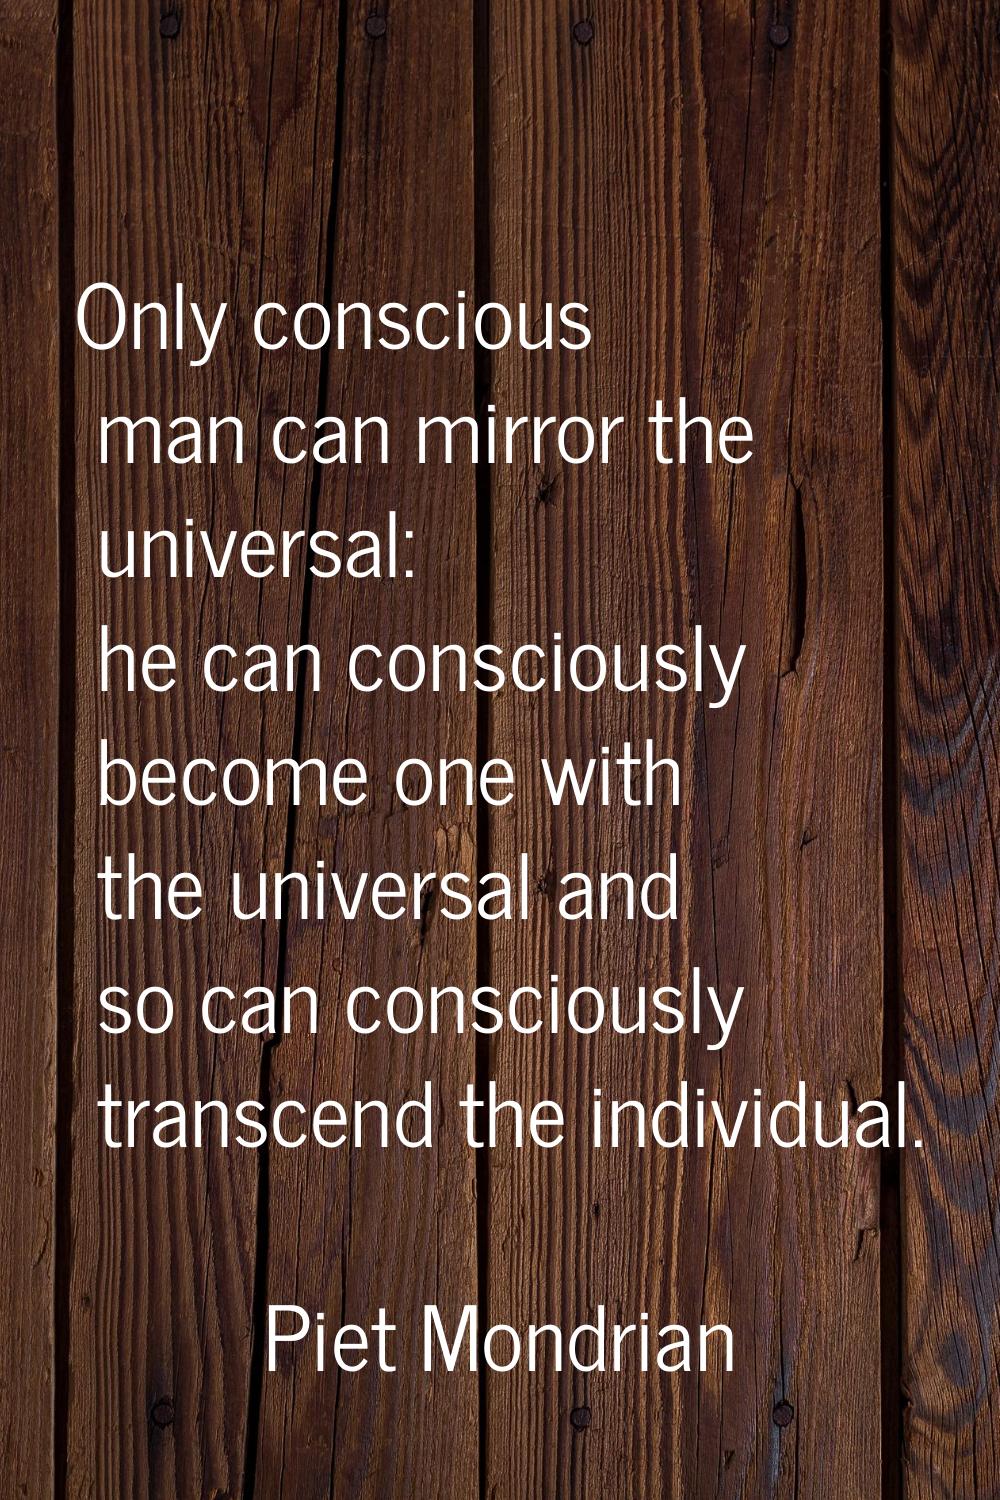 Only conscious man can mirror the universal: he can consciously become one with the universal and s